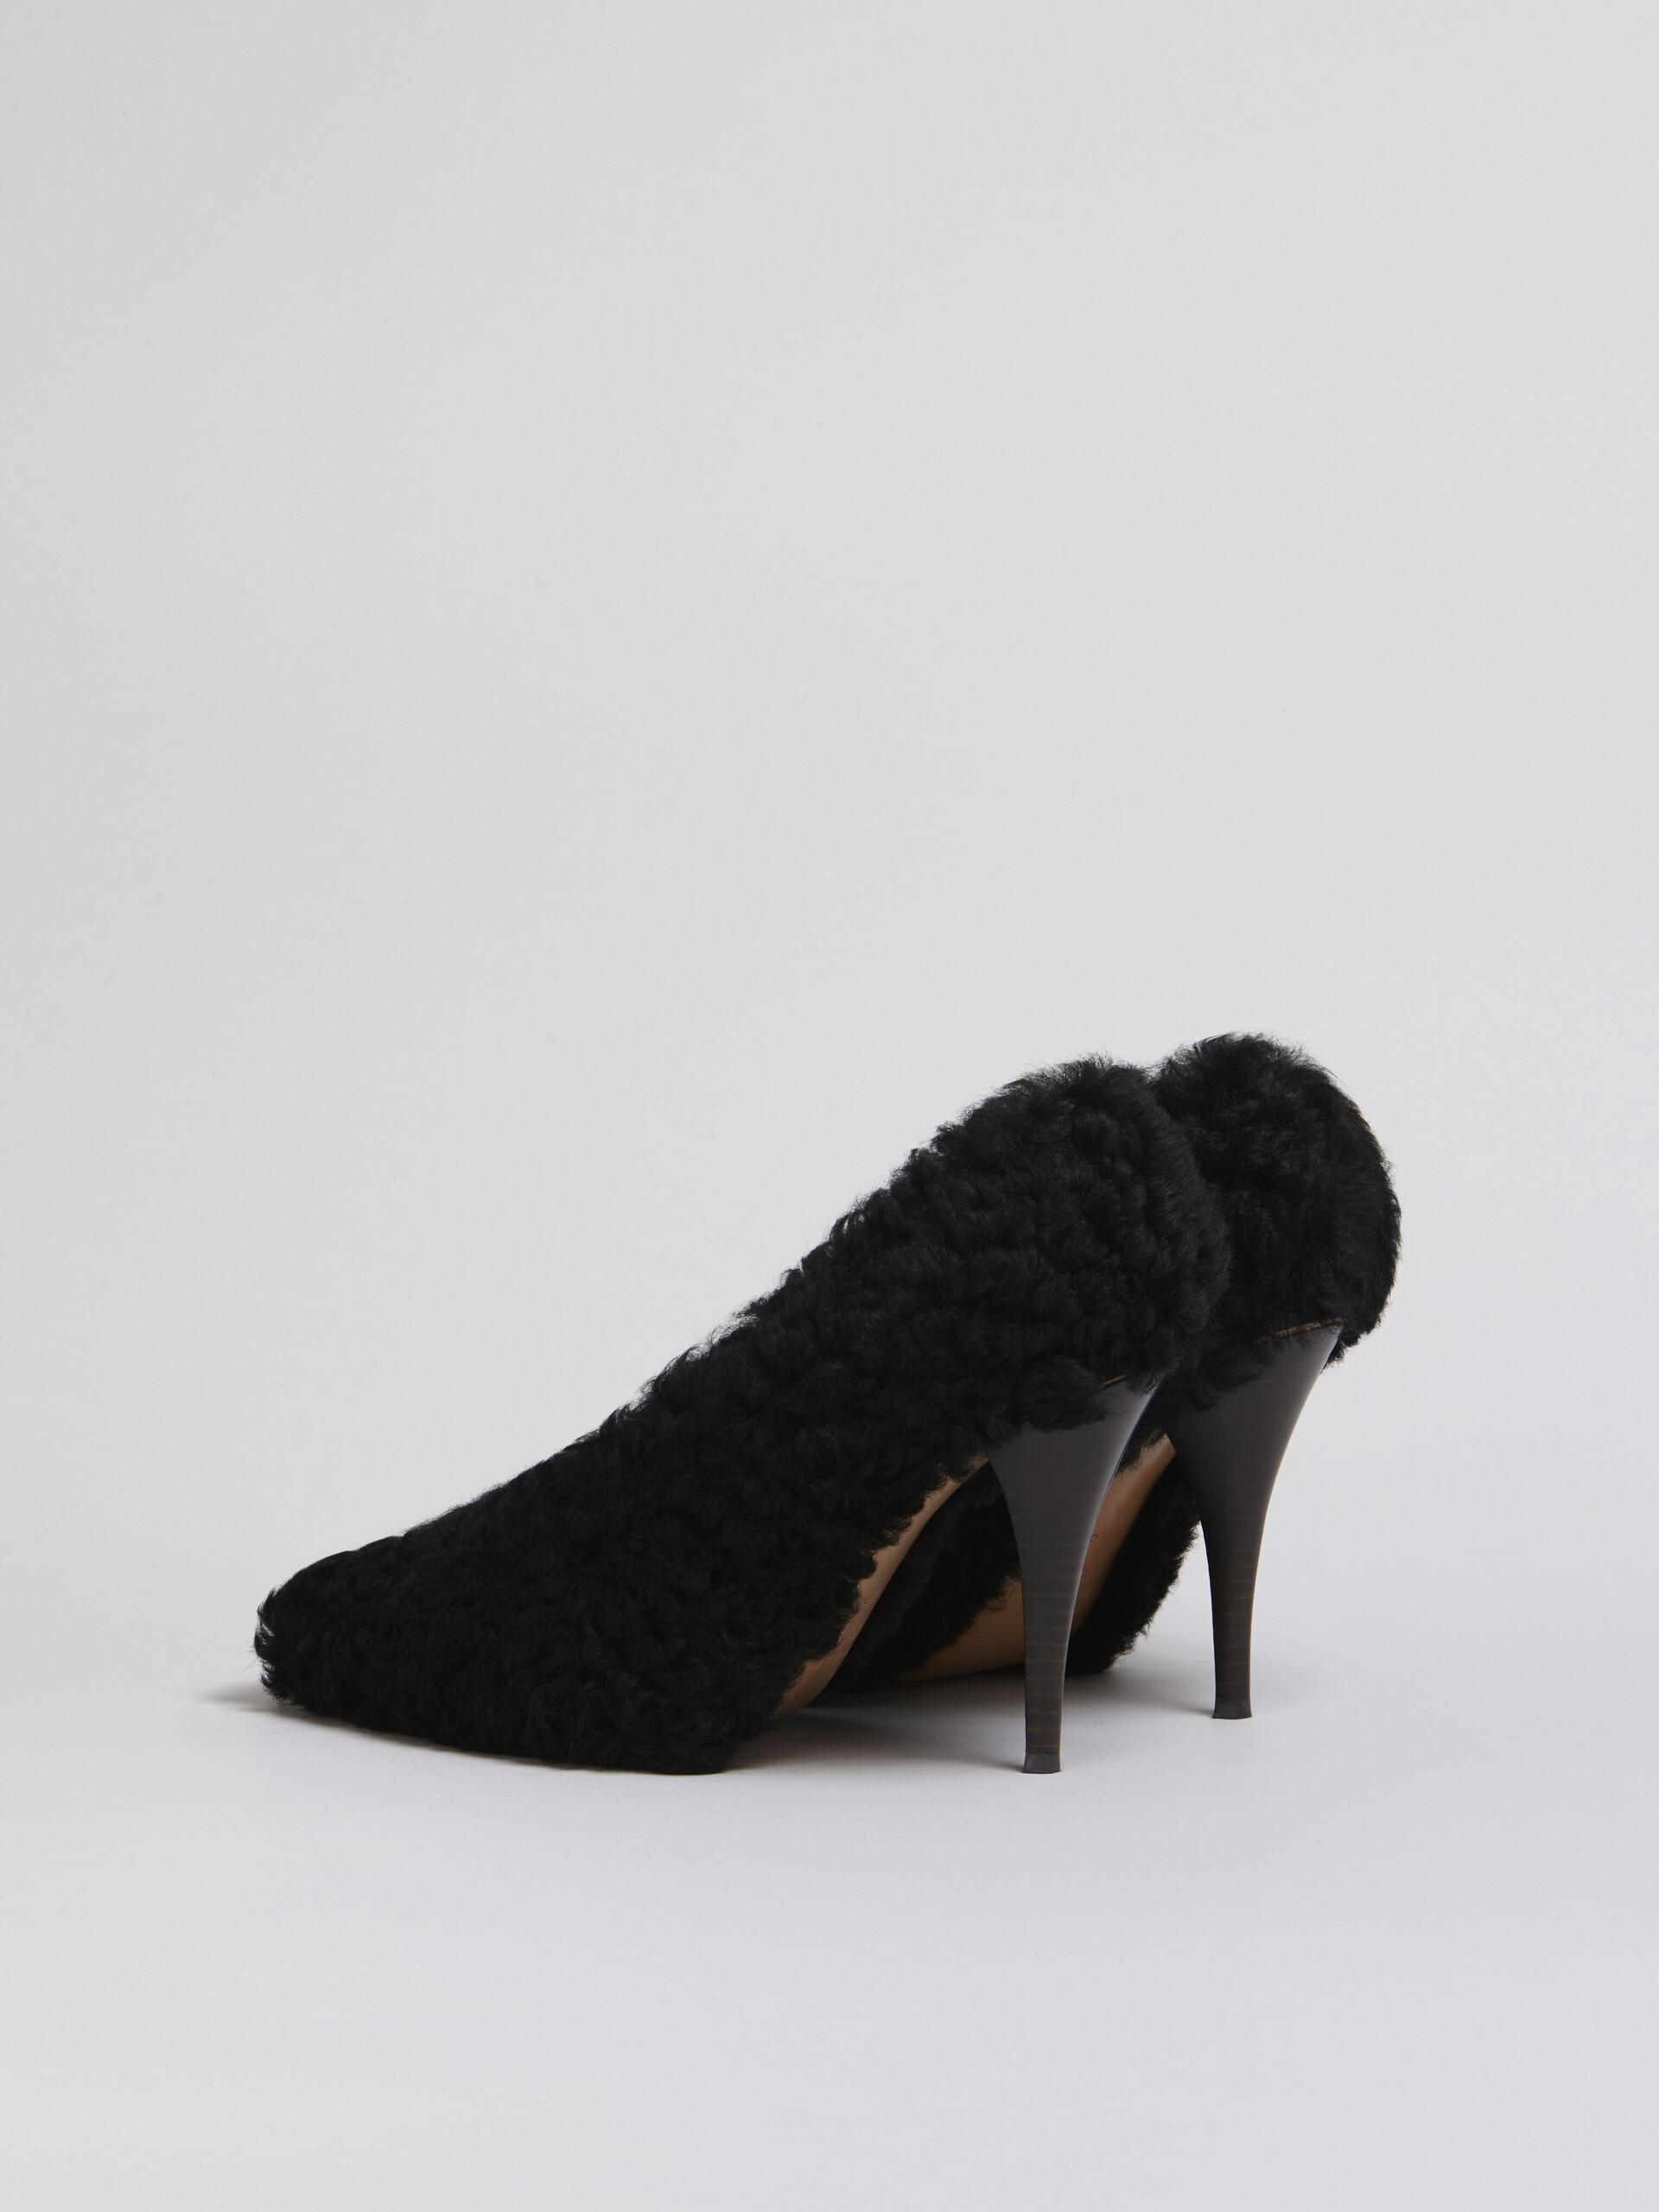 Shearling pump with heel covered in nappa - Pumps - Image 3